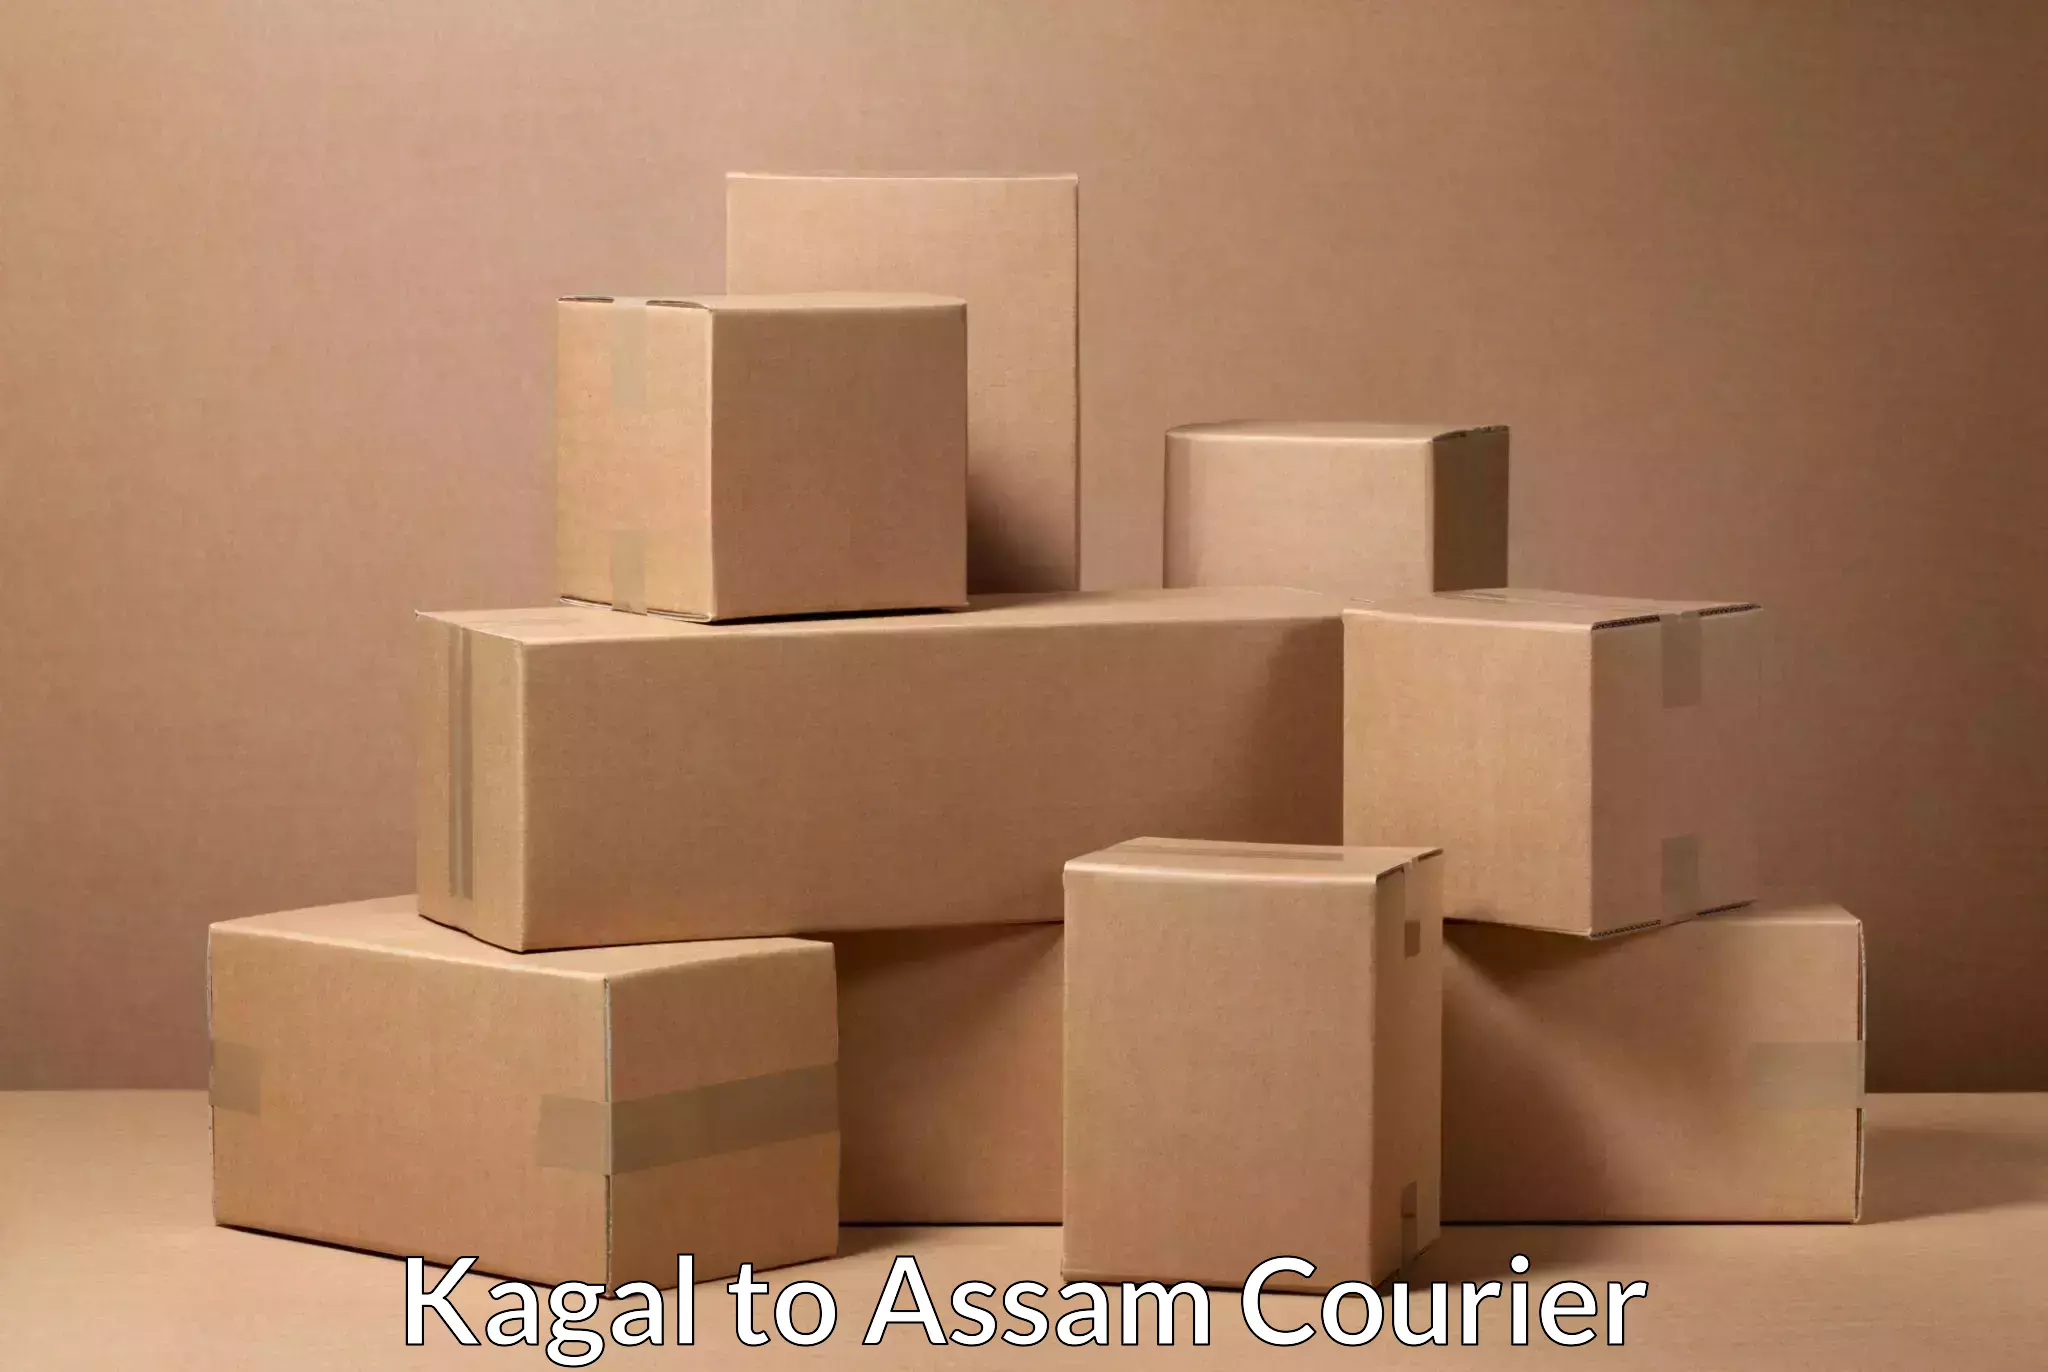 End-to-end delivery Kagal to IIT Guwahati